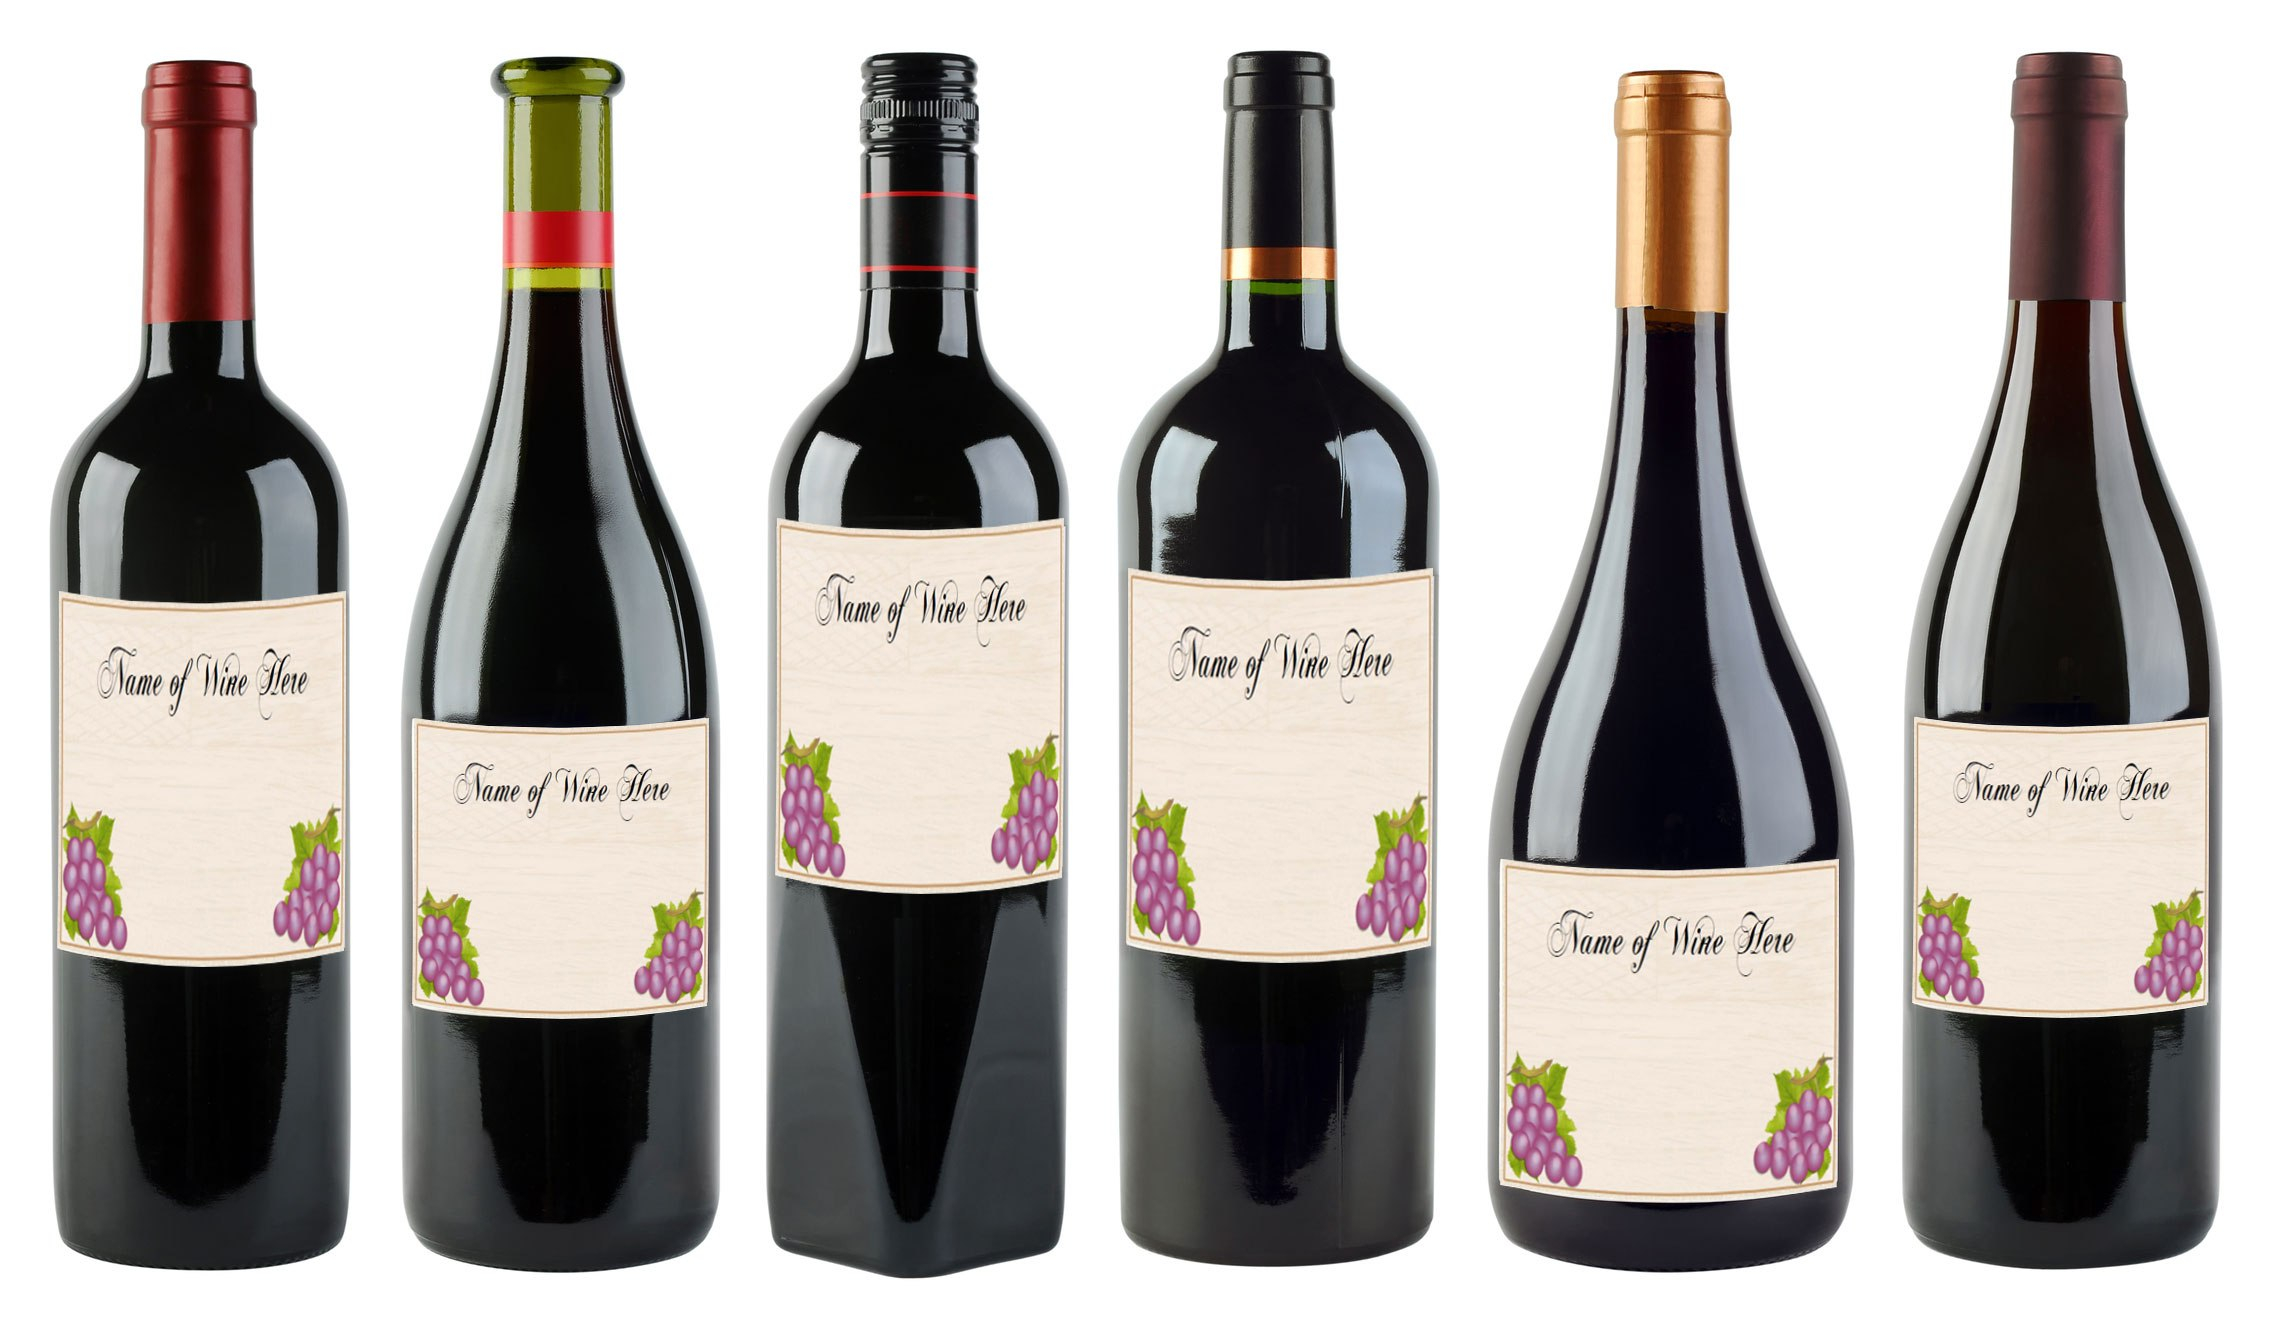 Free Printable Wine Labels You Can Customize  Lovetoknow in Wine Bottle Label Design Template